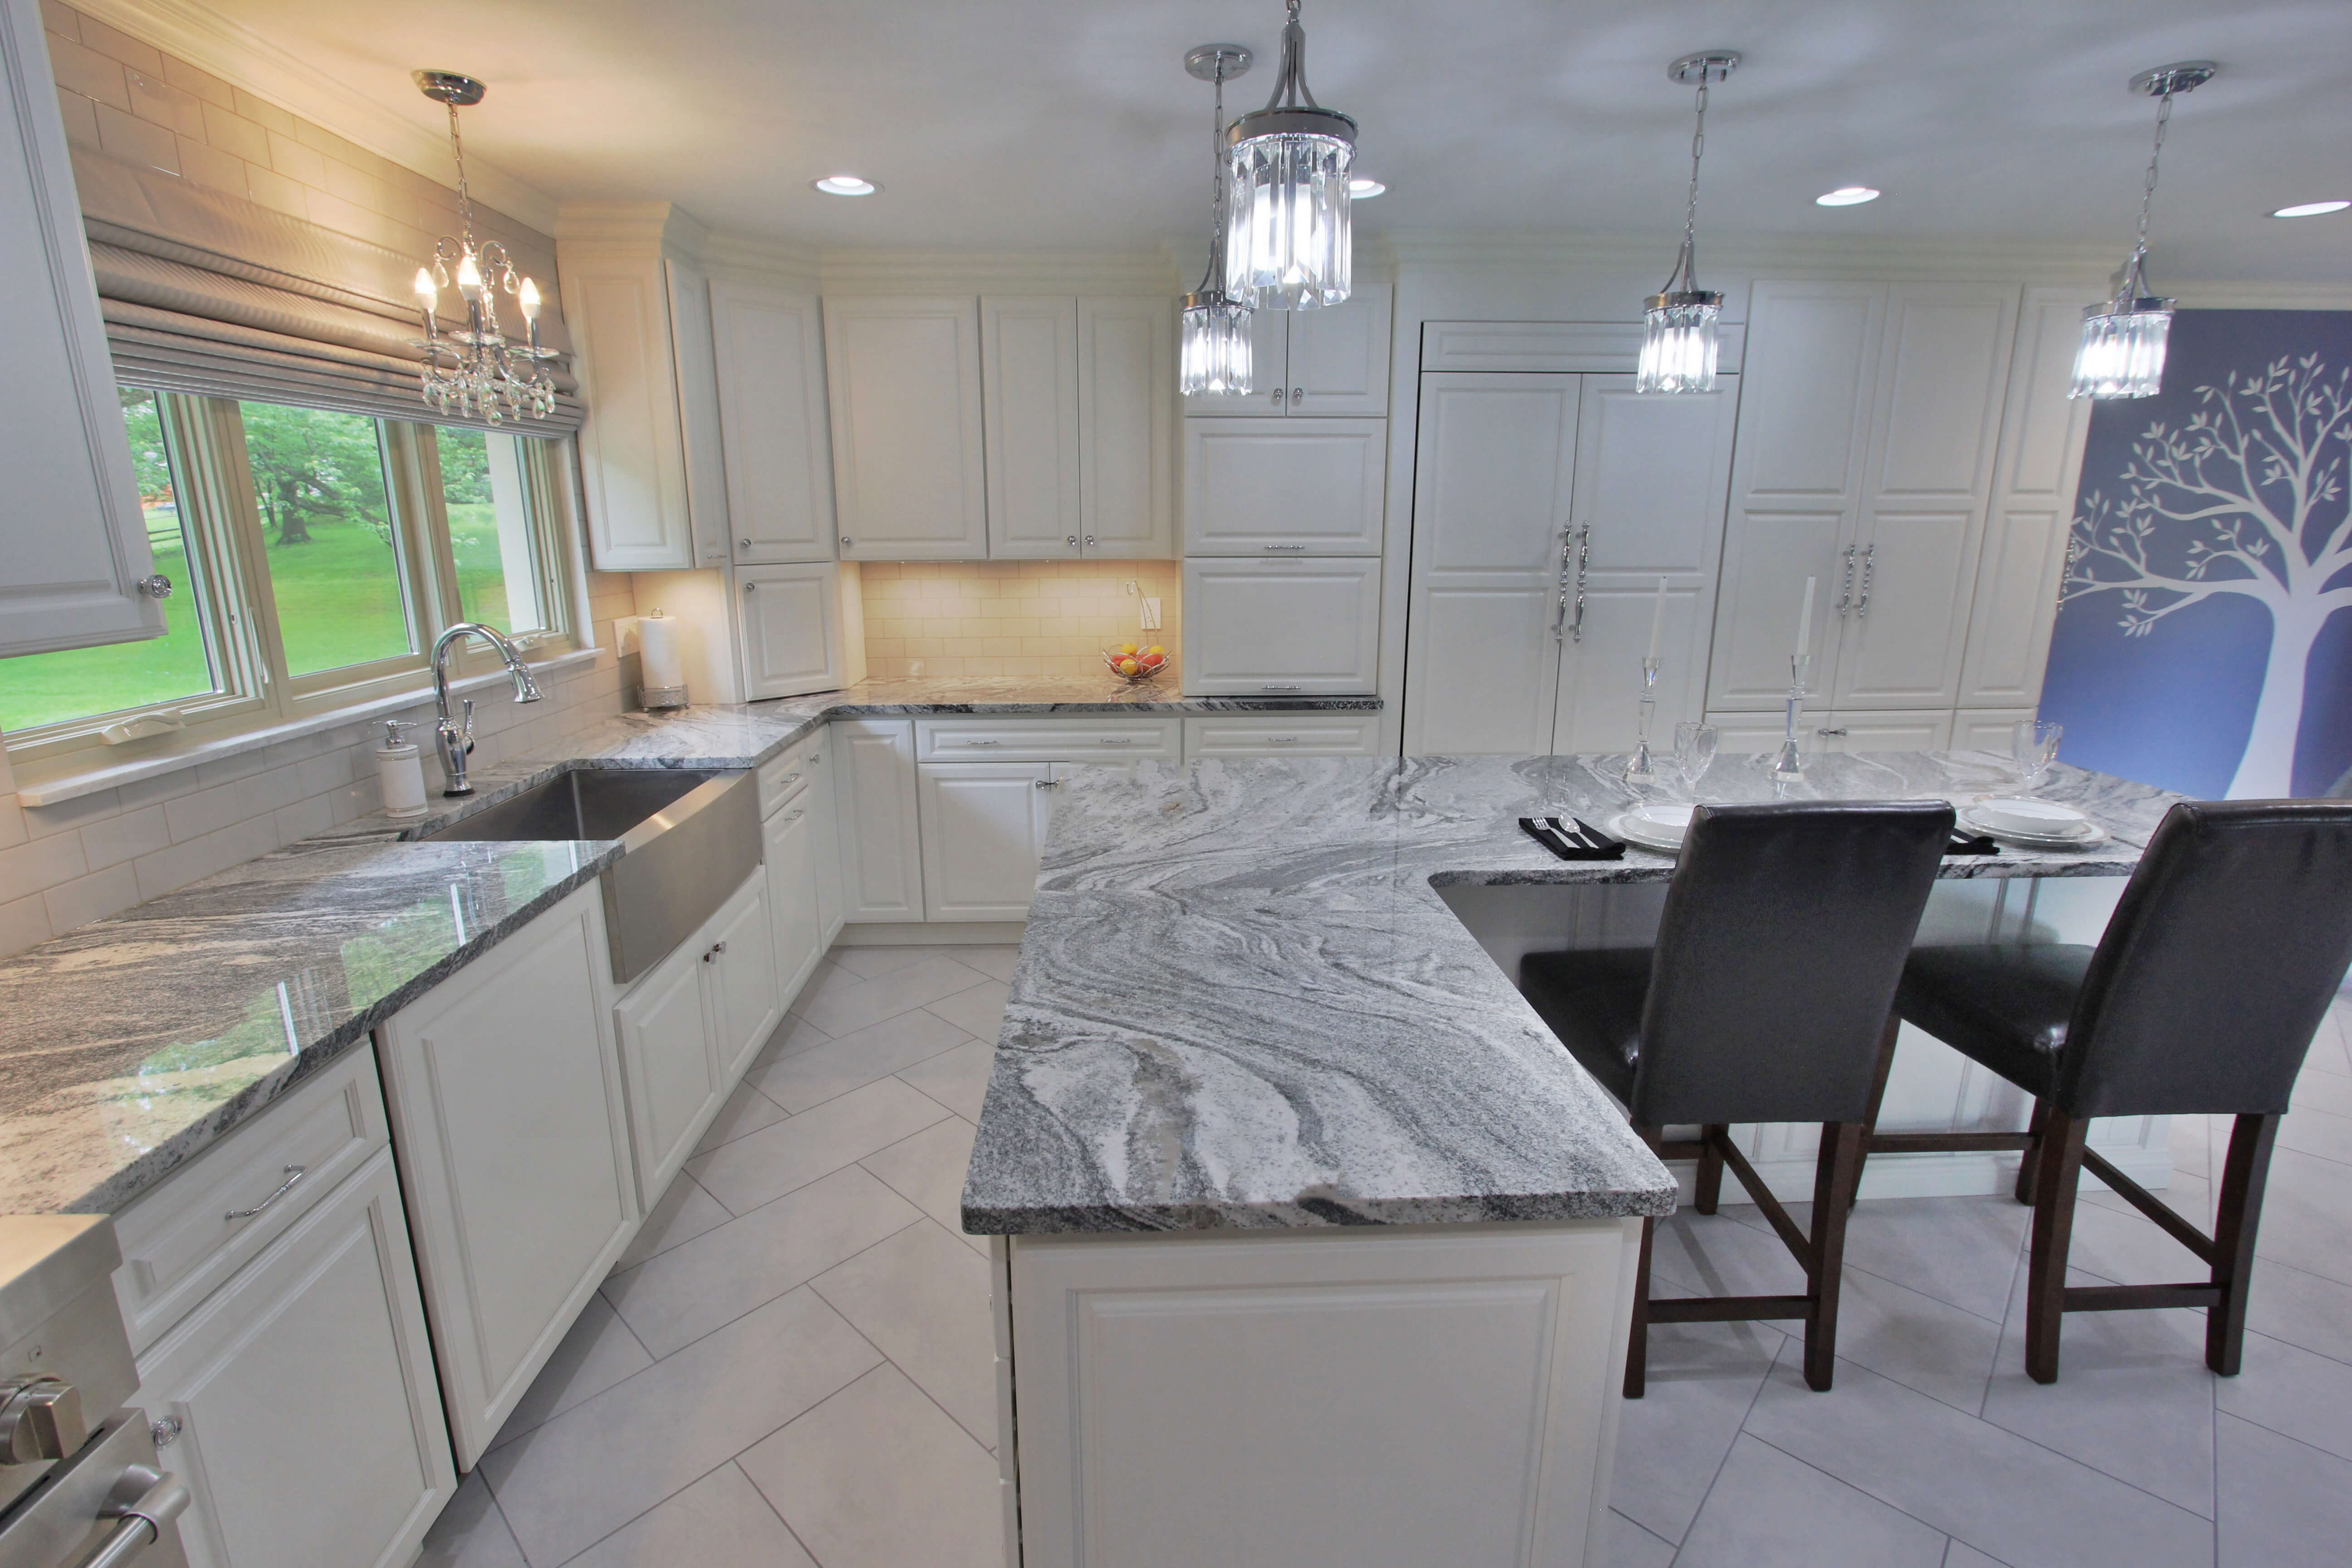 Gorgeous countertops are the highlight of this kitchen.